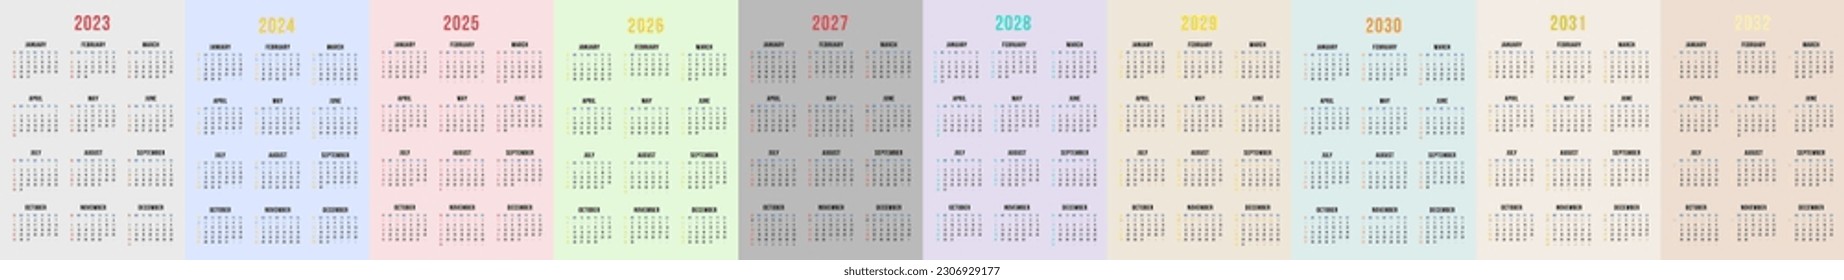 Colorful calendar set for, 2024, 2025,2026, 2027, 2028, 2029, 2030, 2031, 2032 years. One Page Editable Vertical Vector Calendar. svg